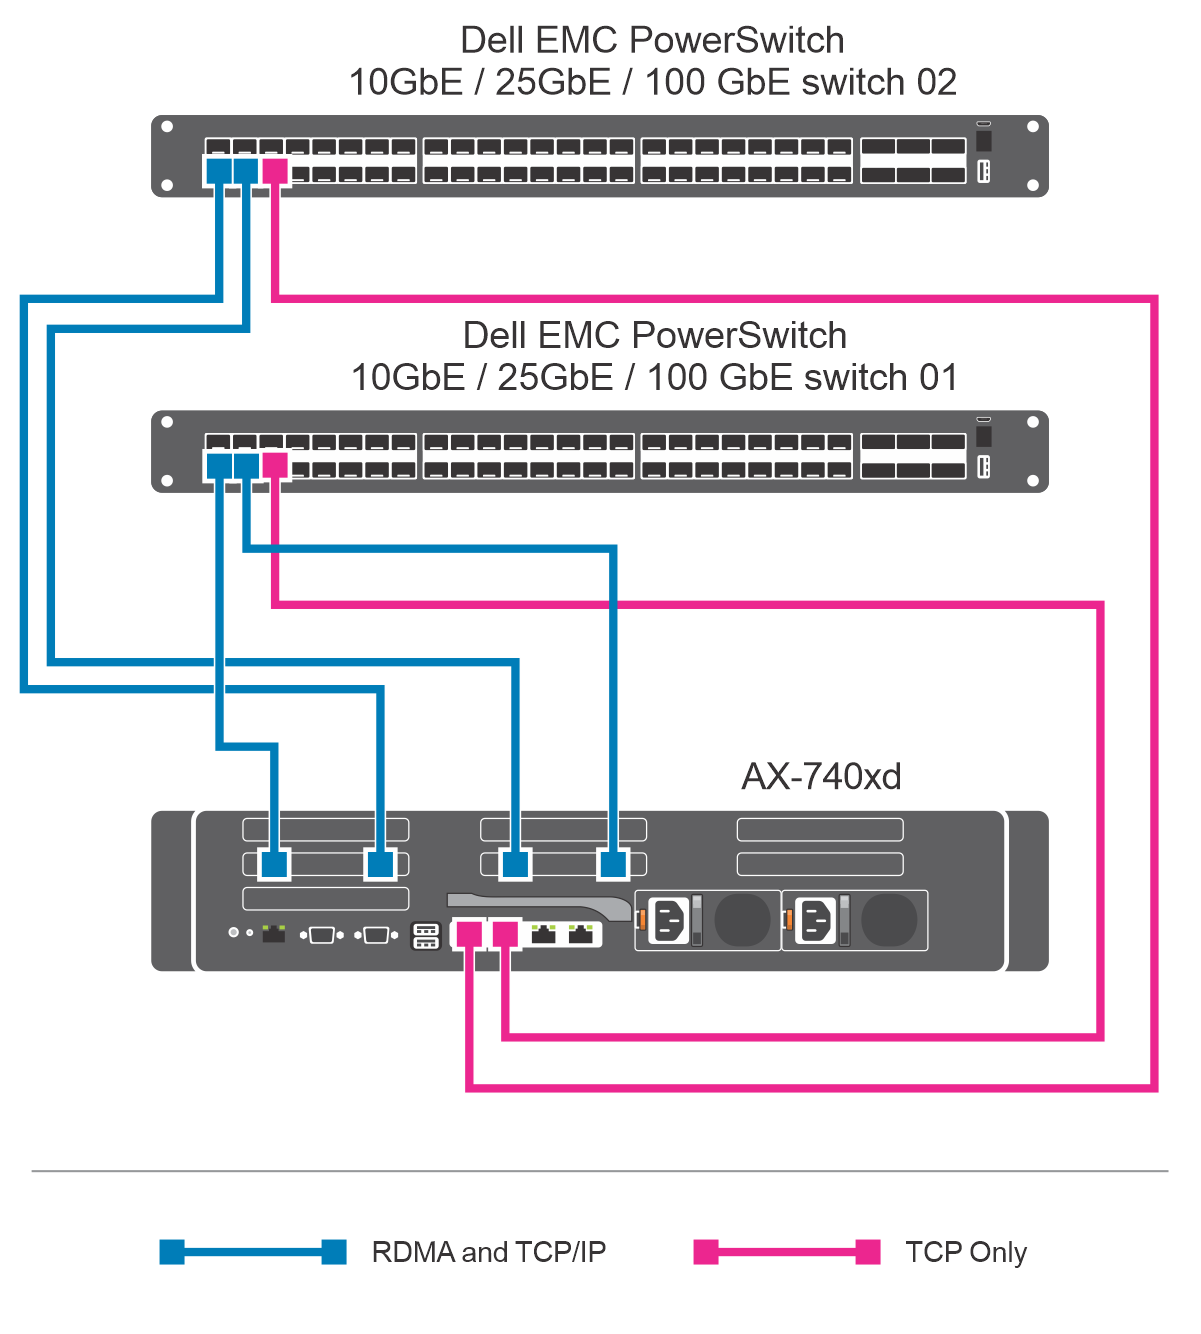 Figure showing network integration in a non-converged configuration with four NIC ports